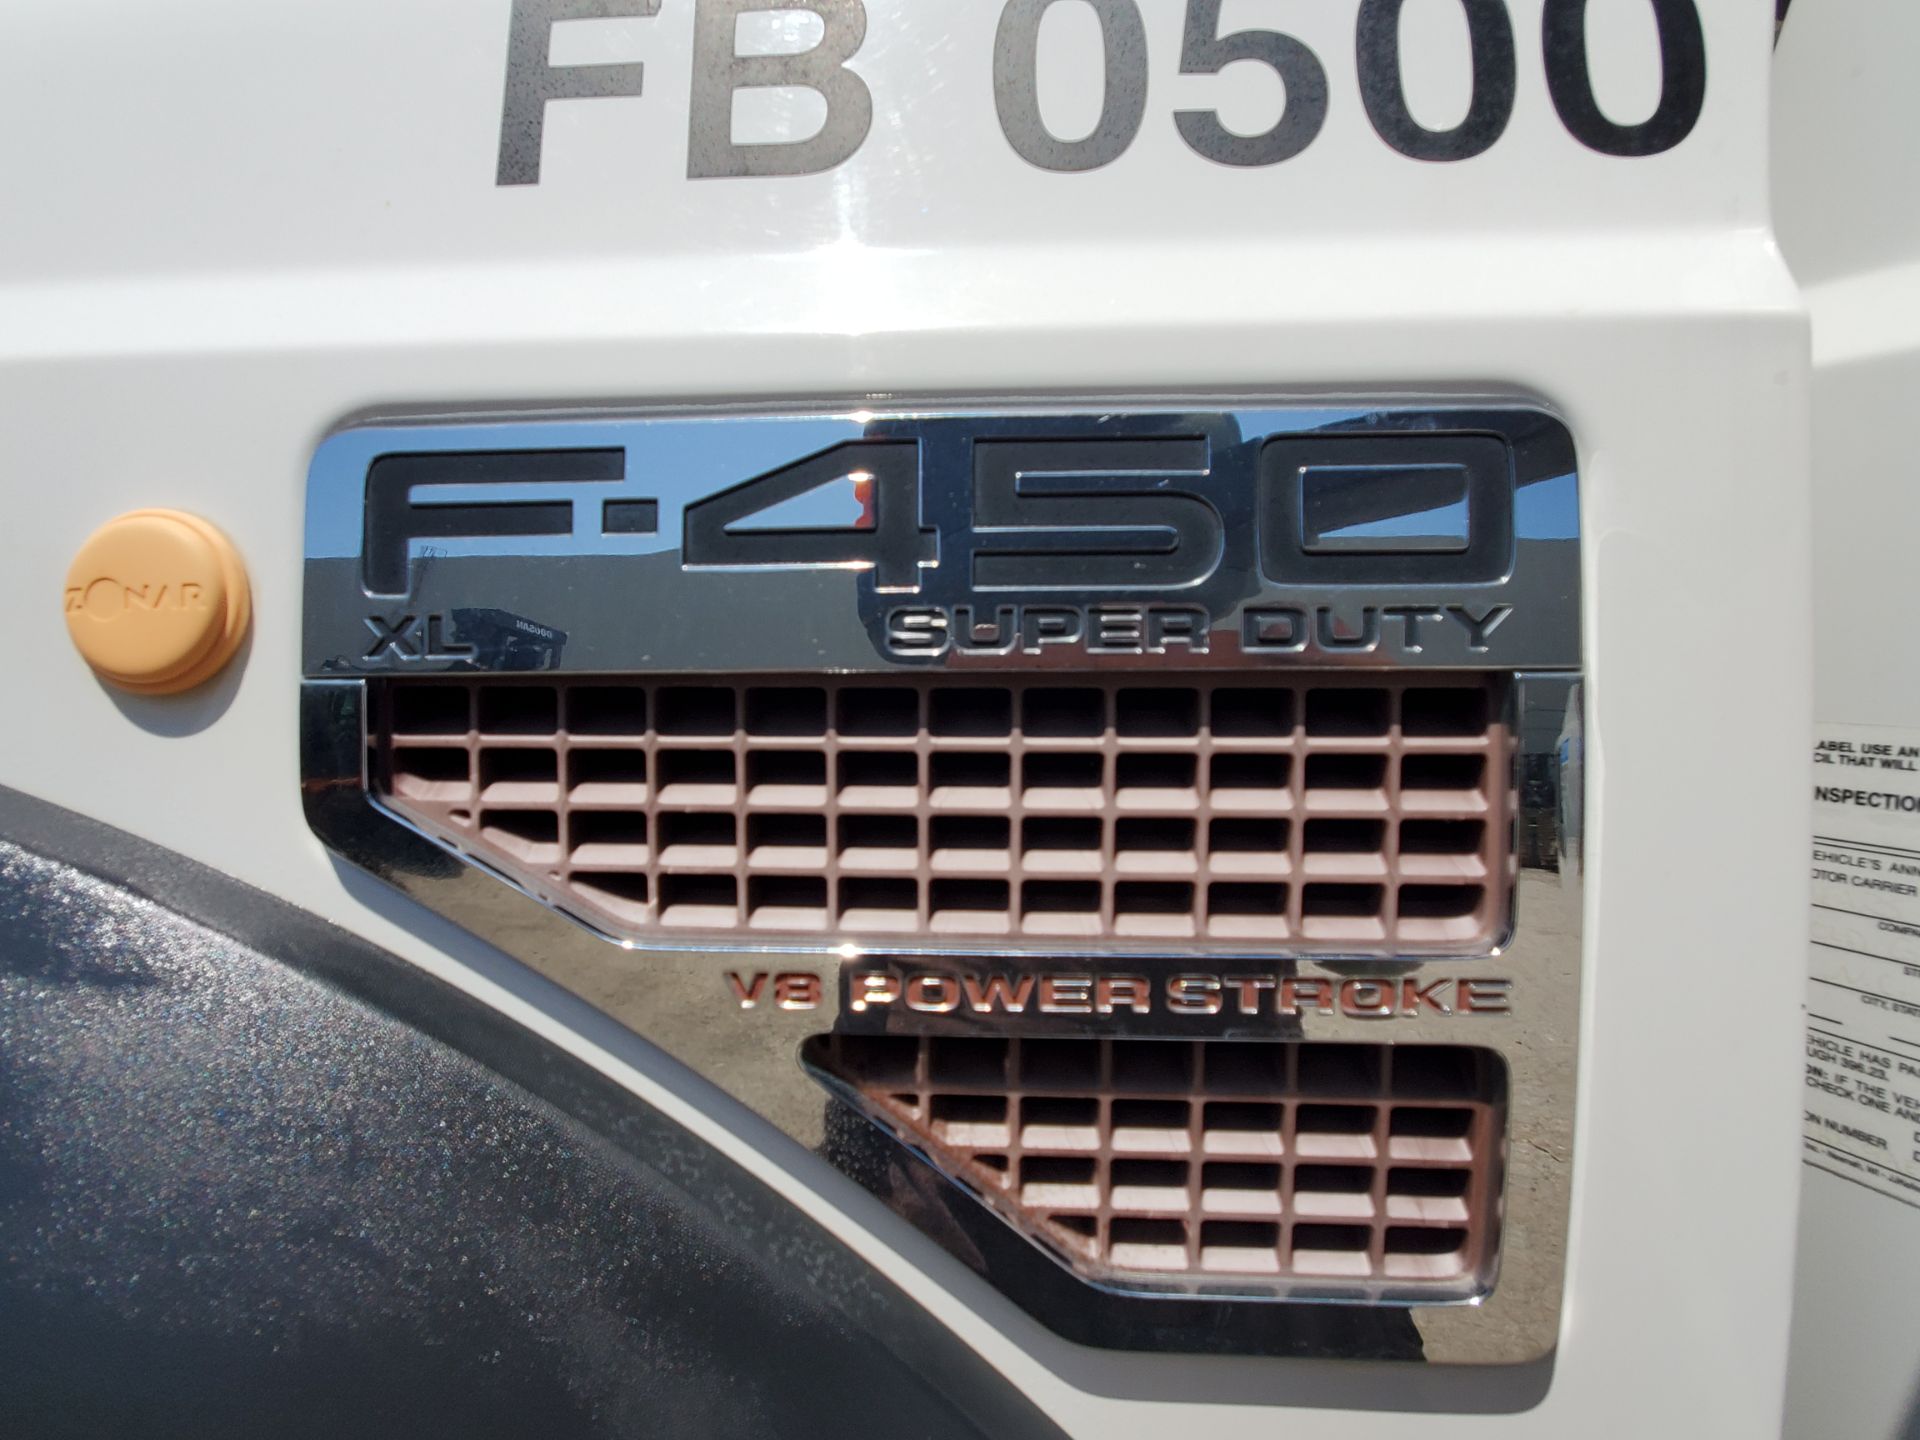 2010 Ford F450 Crew Cab Truck - Image 18 of 21